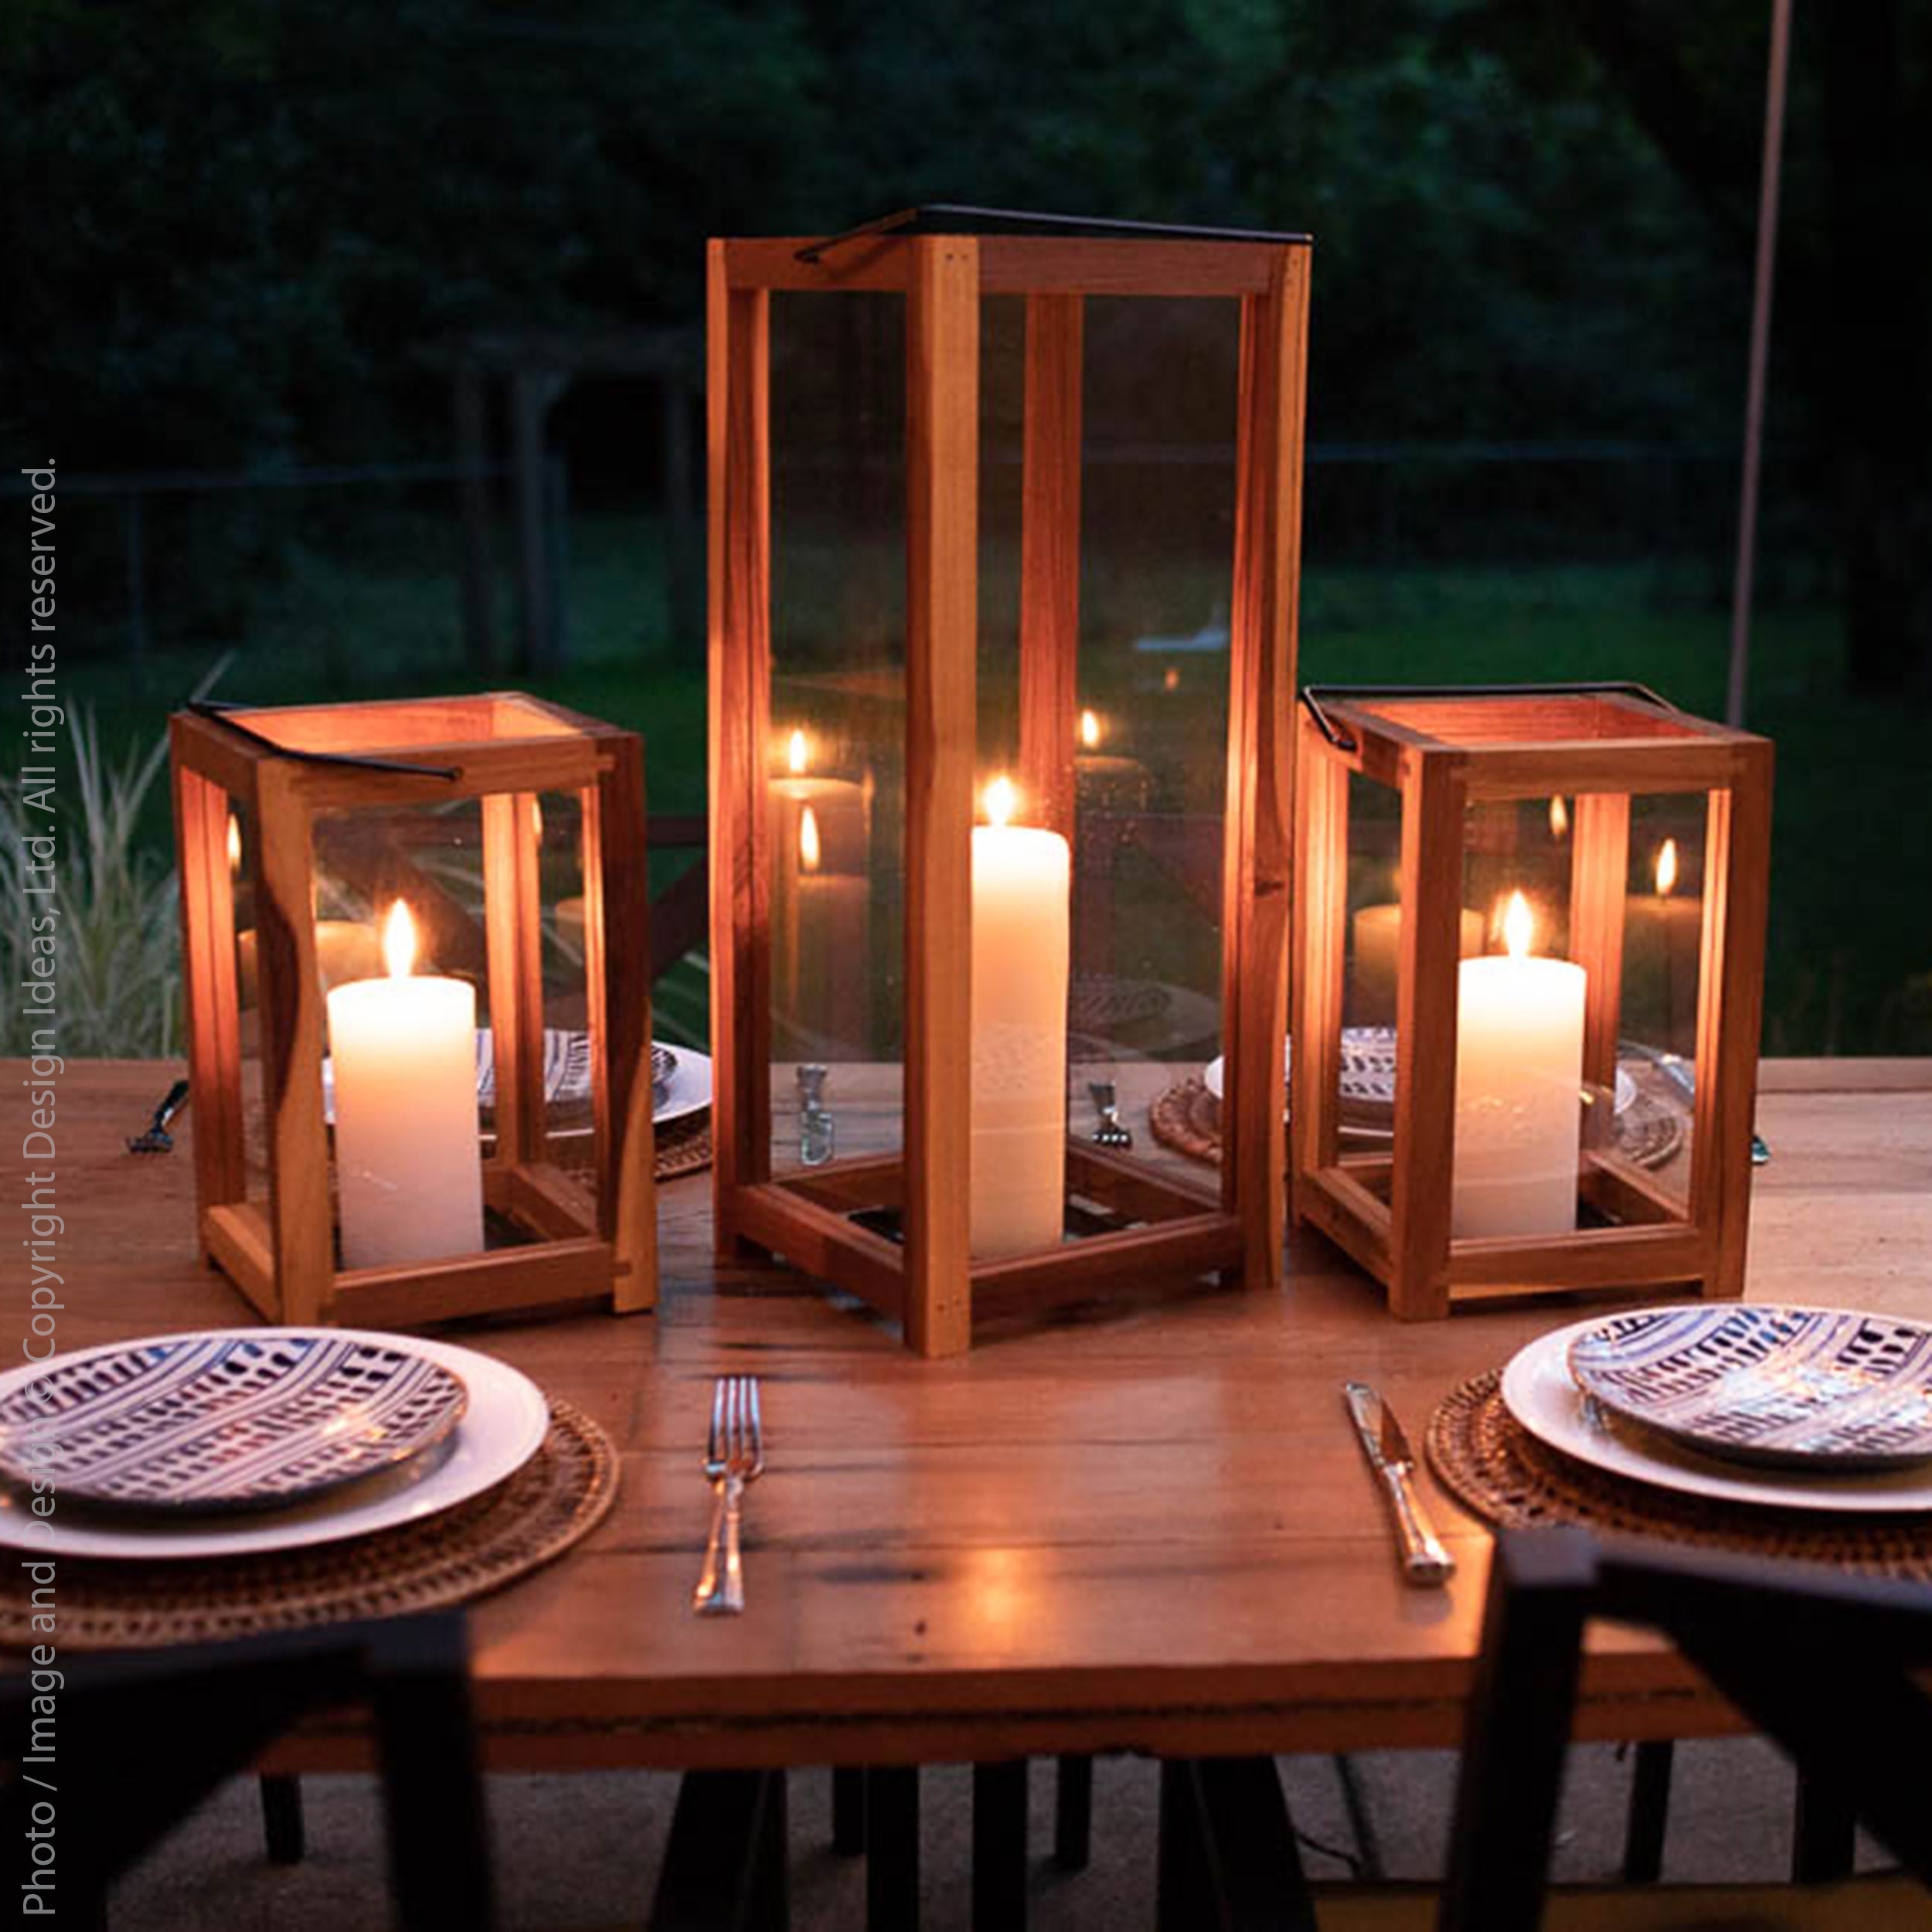 Takara Teak Lantern (Large) Black Color | Image 2 | From the Takara Collection | Elegantly constructed with natural teak for long lasting use | This lantern is sustainably sourced | Available in natural color | texxture home